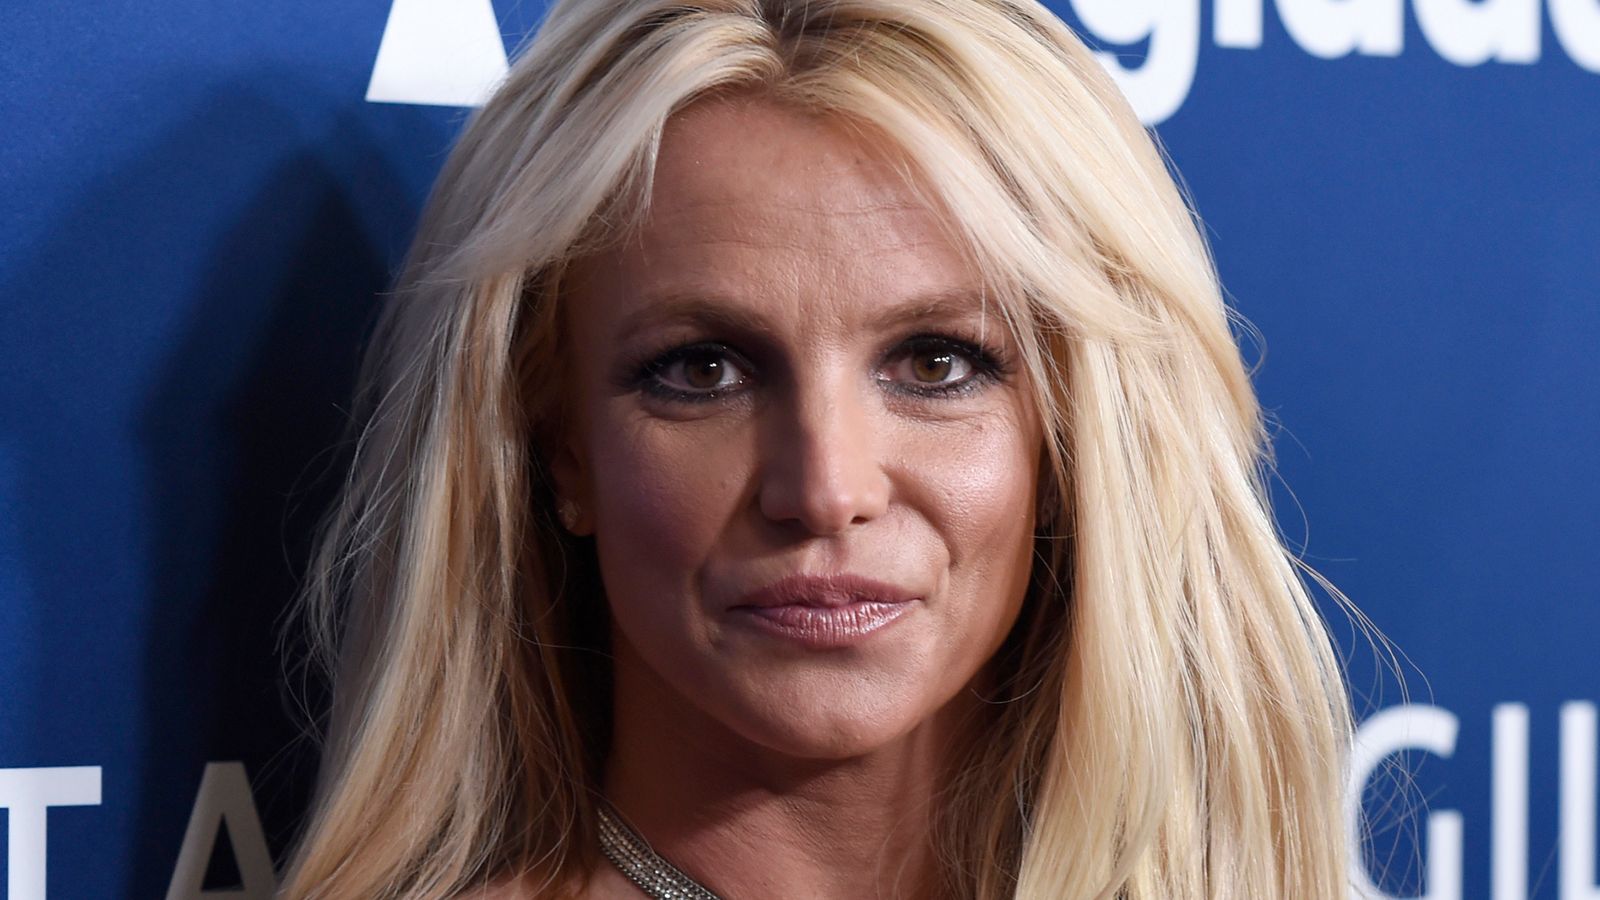 Britney Spears Settles Traffic Violation With Fine And Traffic School